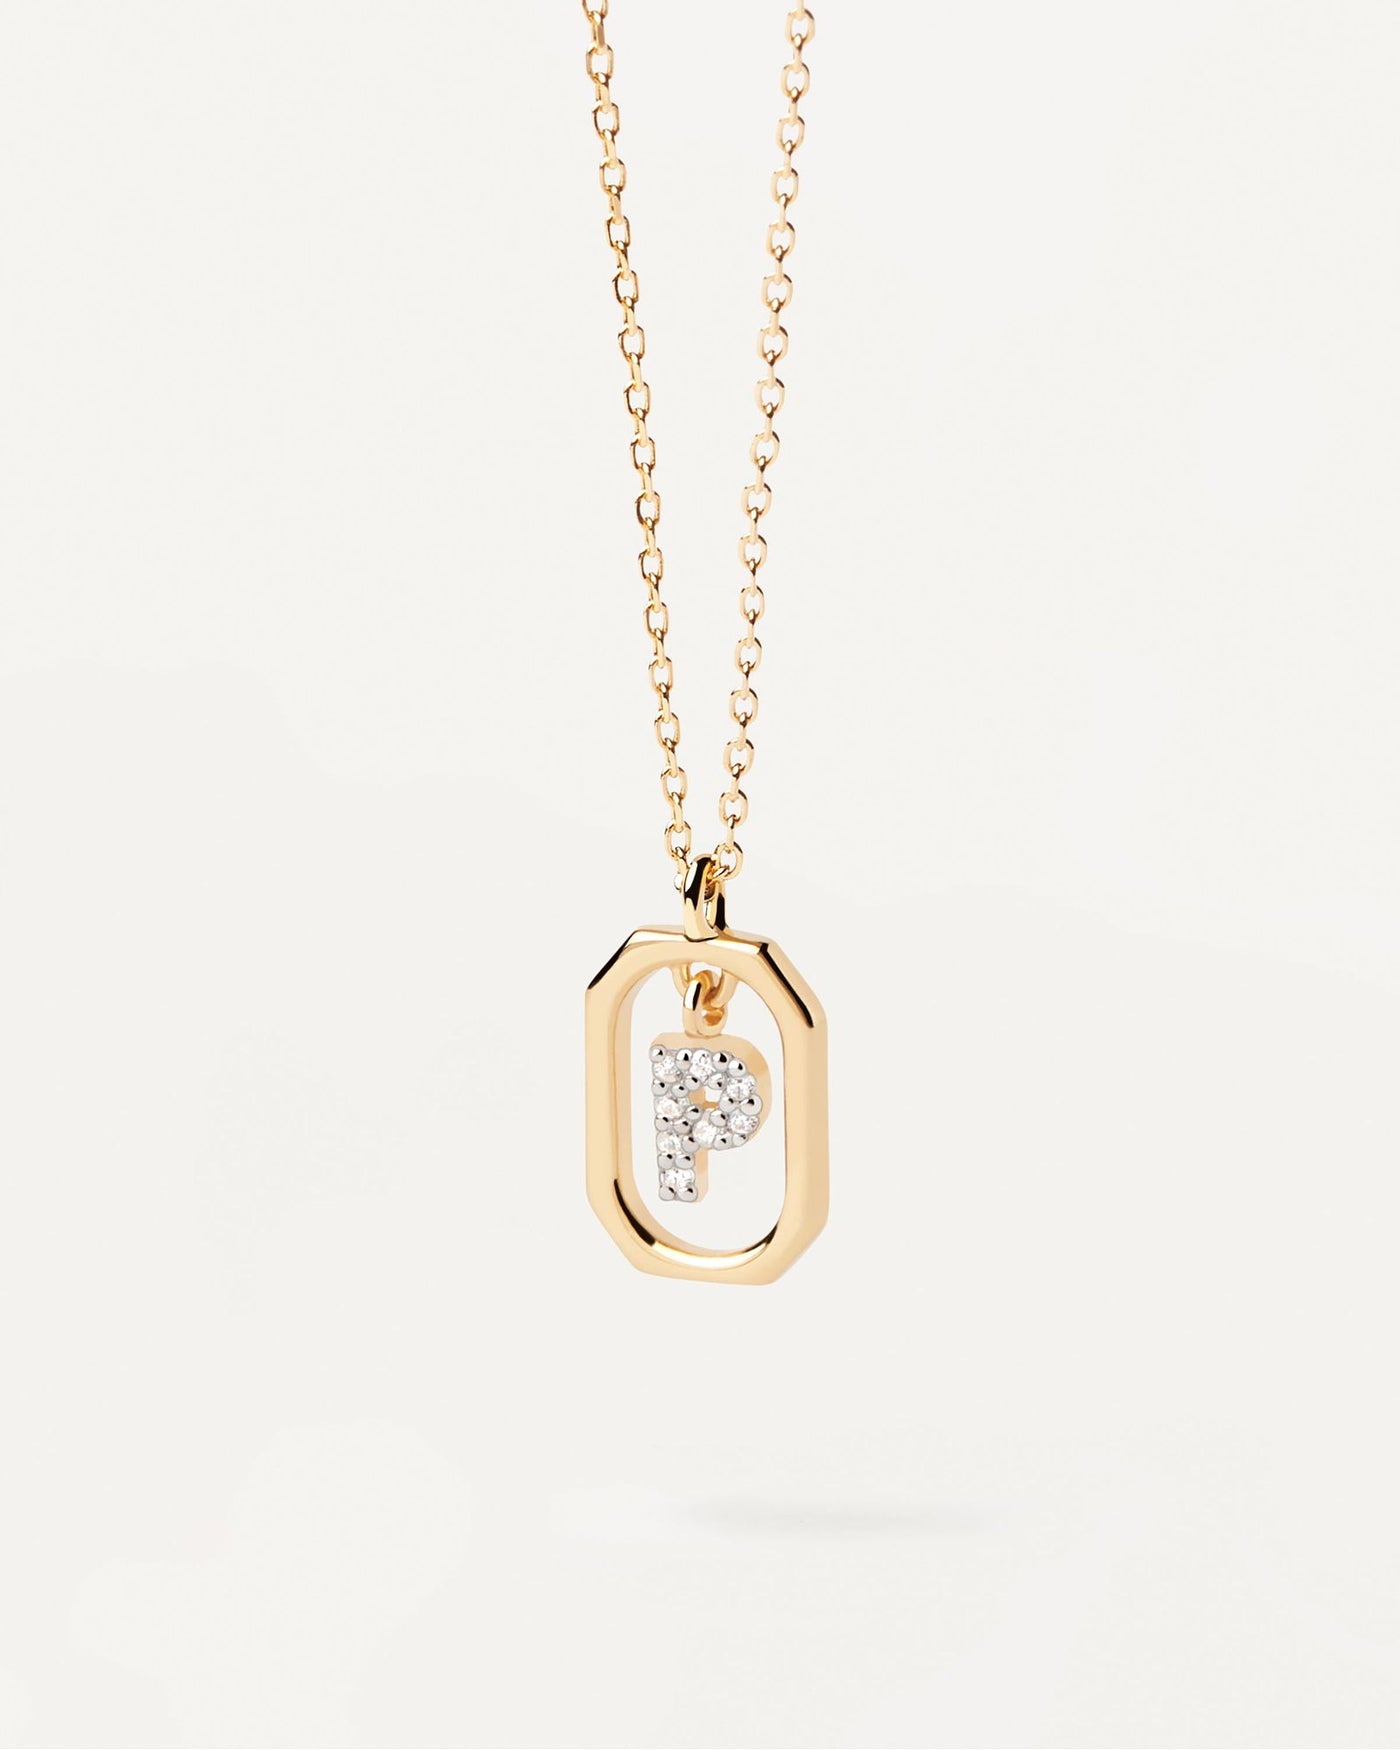 2024 Selection | Mini Letter P Necklace. Small initial P necklace in zirconia inside gold-plated silver octagonal pendant. Get the latest arrival from PDPAOLA. Place your order safely and get this Best Seller. Free Shipping.